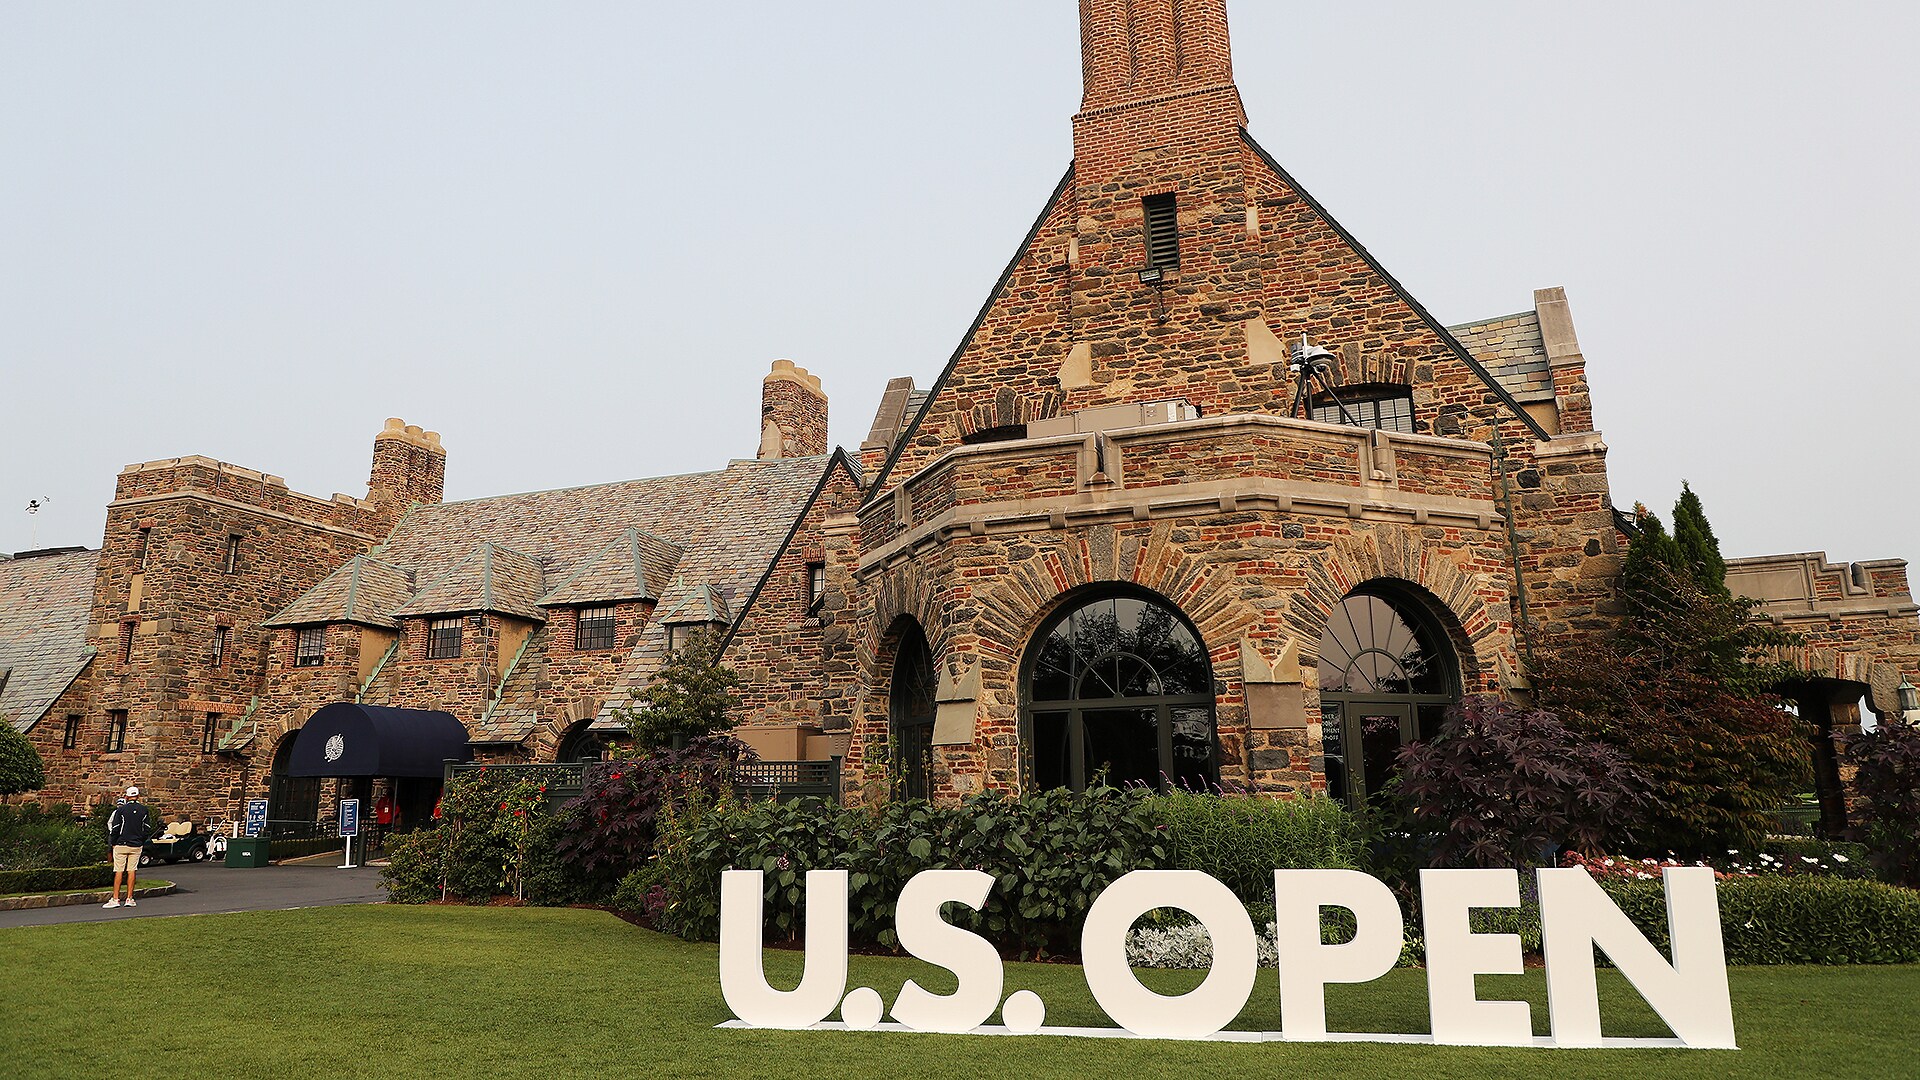 Round 1 and Round 2 tee times for the U.S. Open at Winged Foot